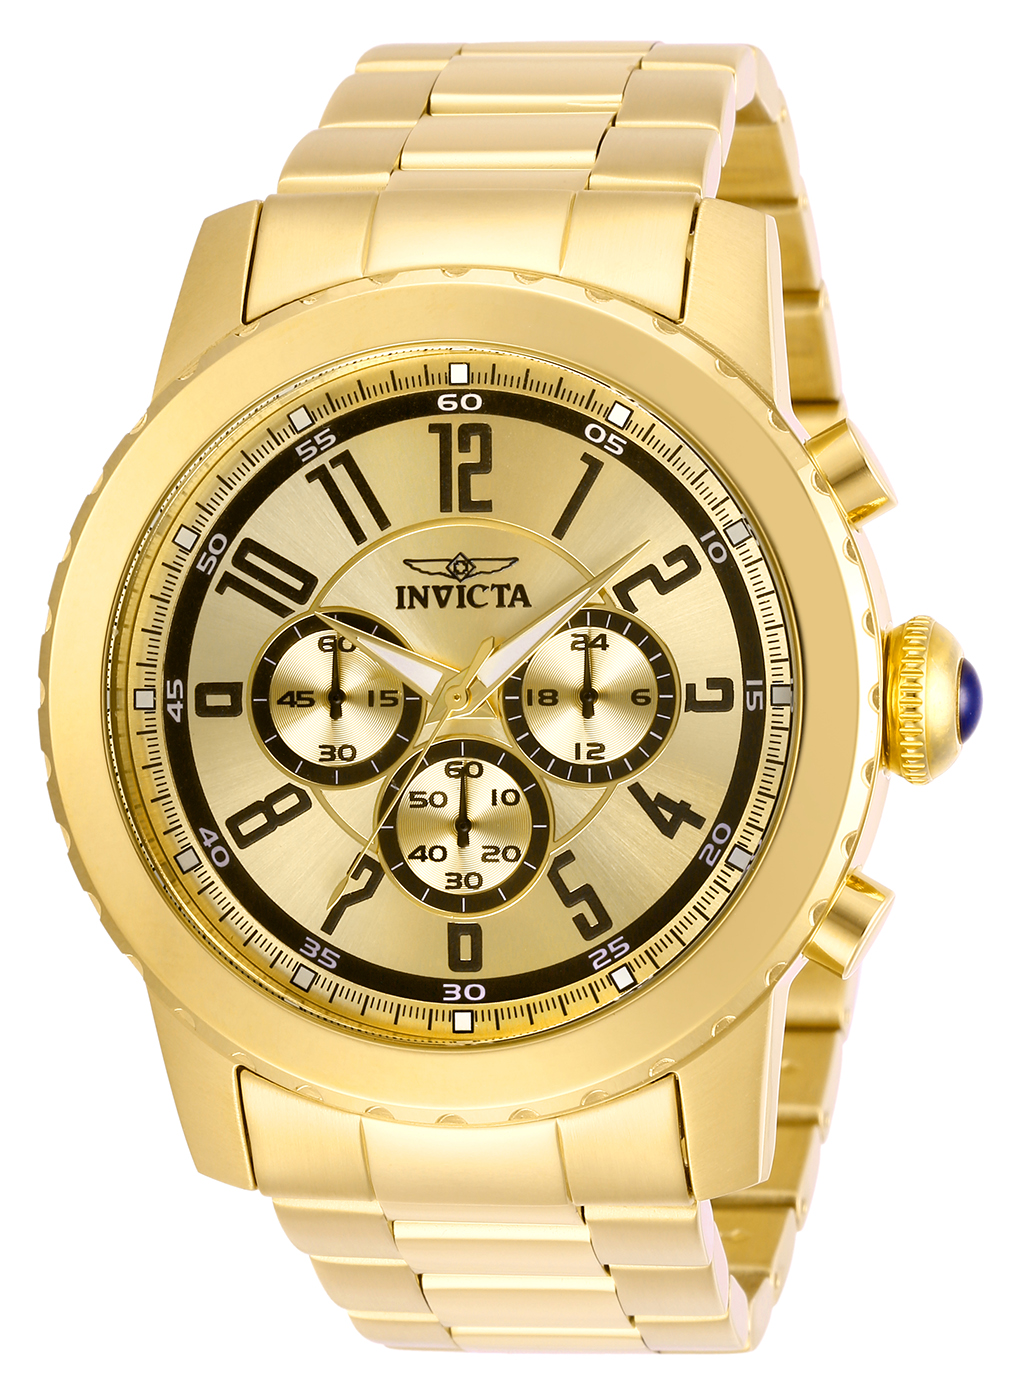 Invicta Specialty Men's Watch - 50mm, Gold (19465)